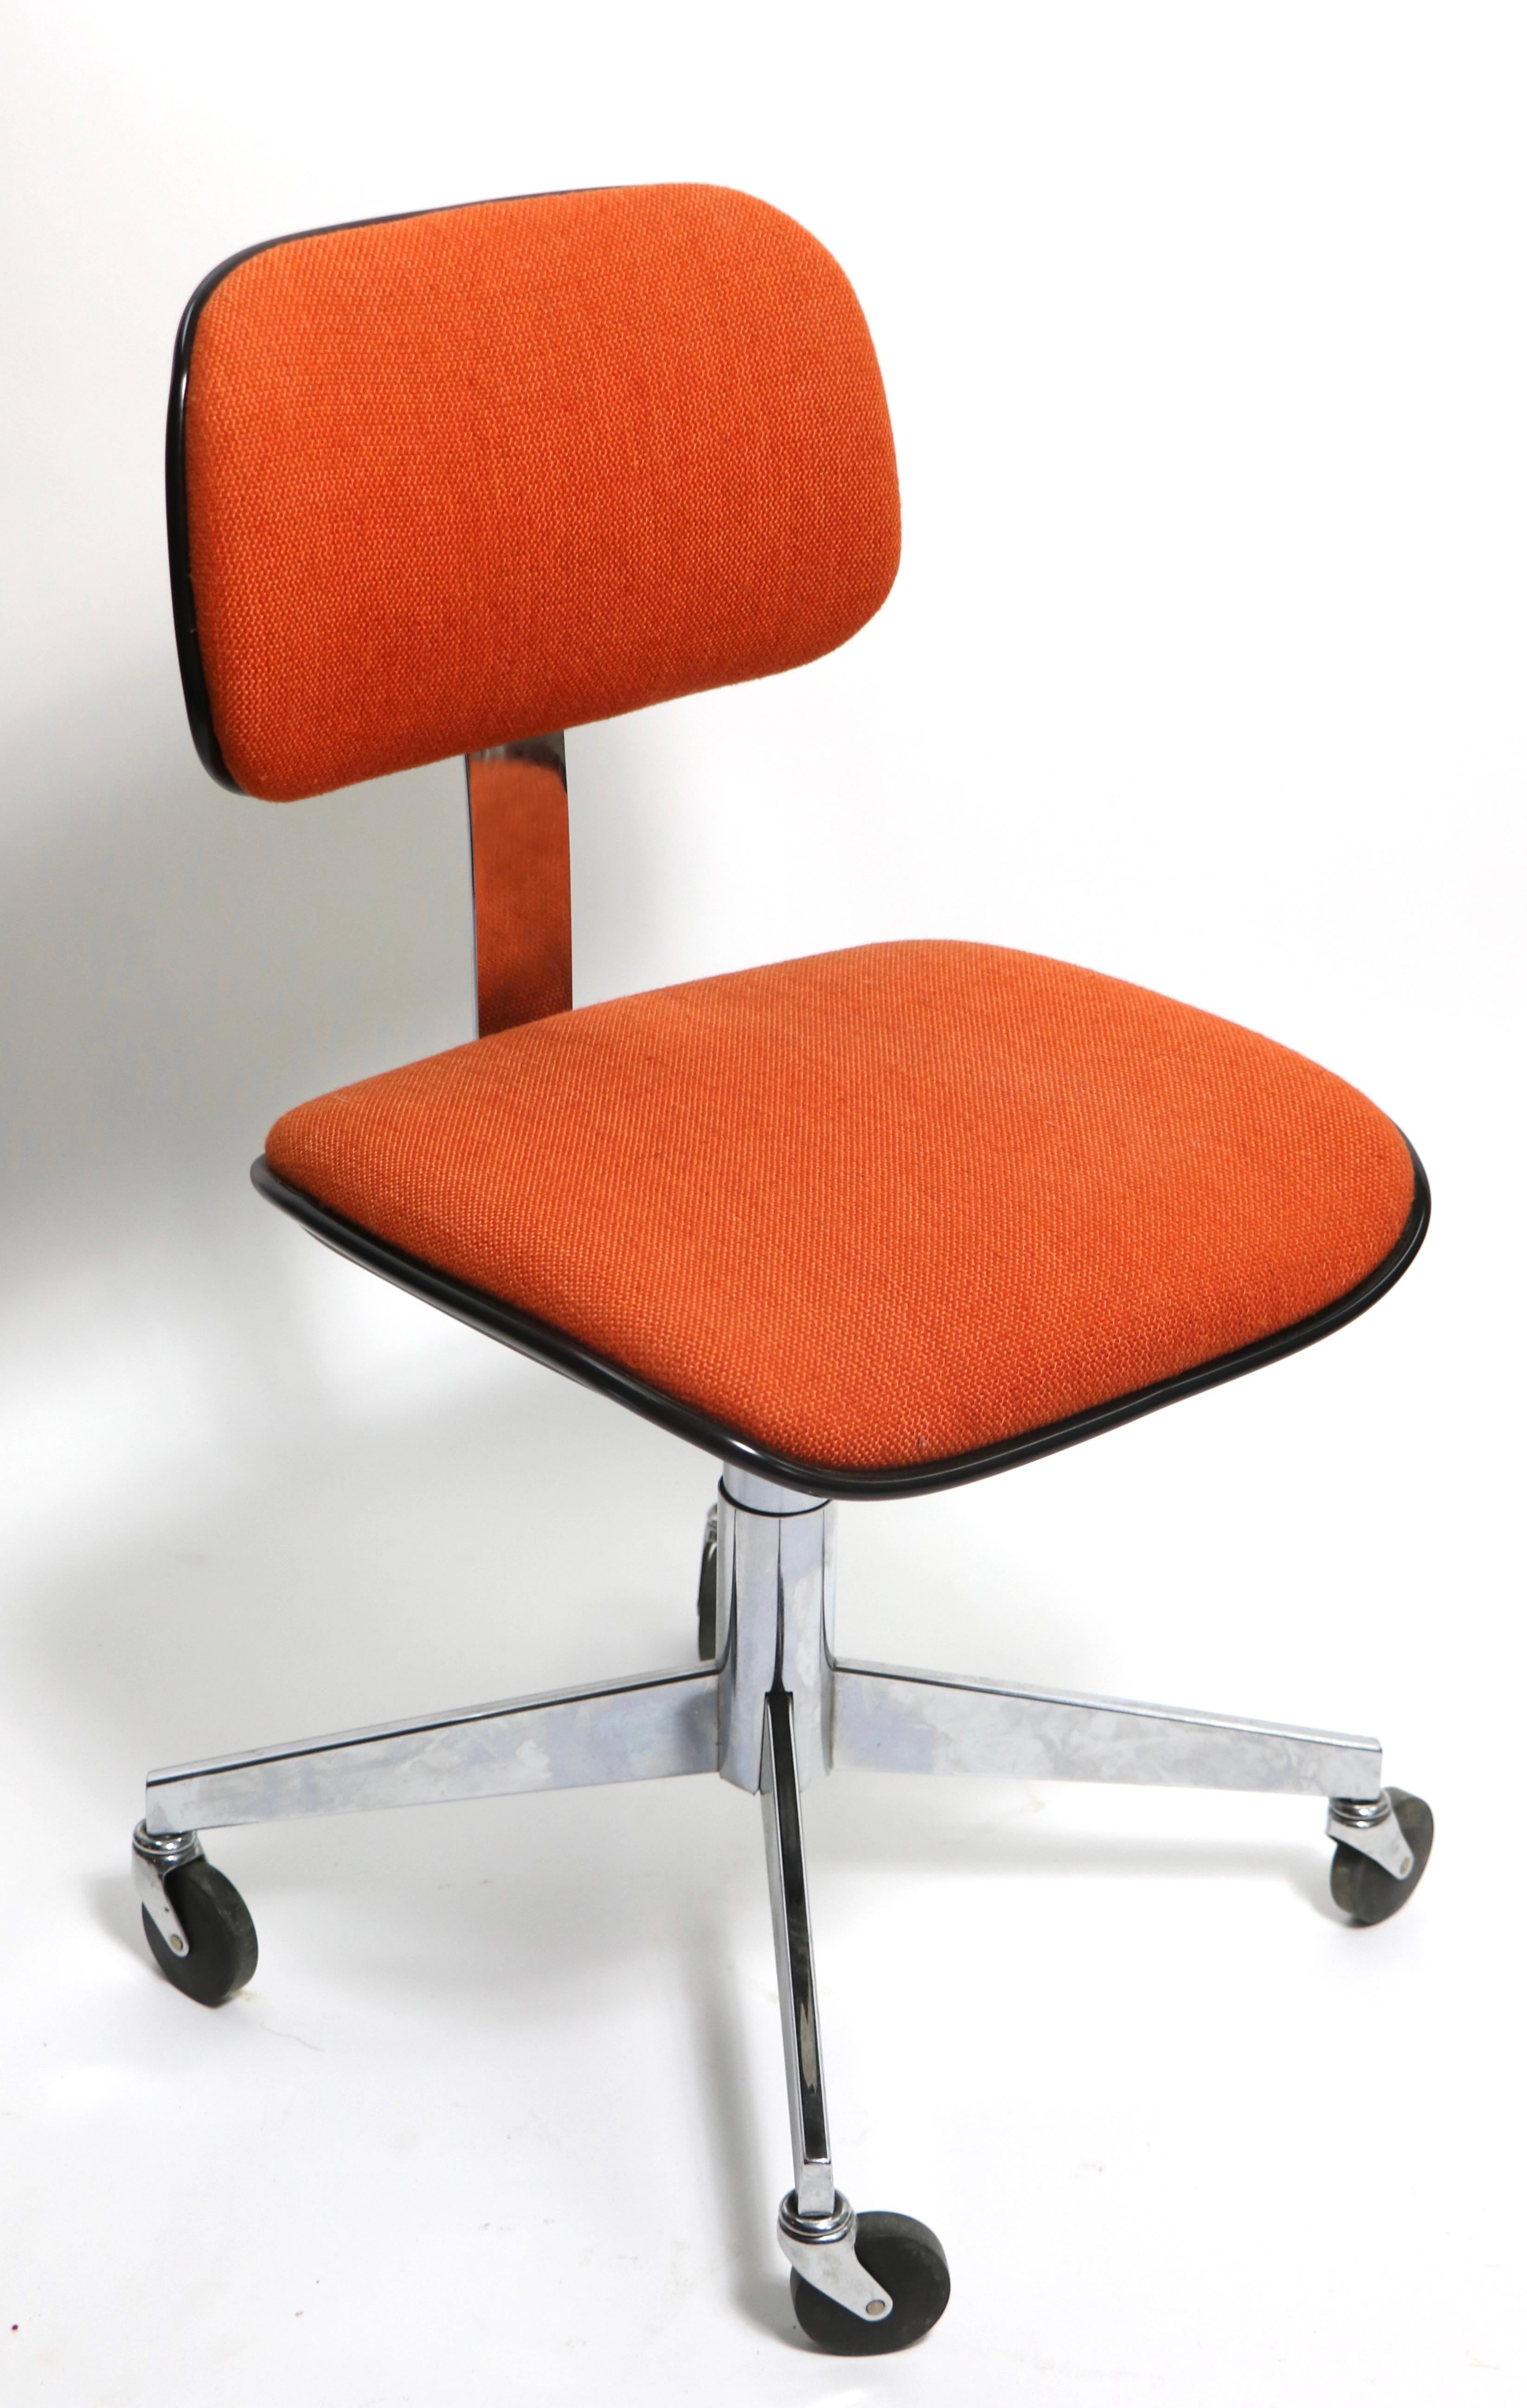 Exceptional swivel desk chair by noted manufacturer Steelcase, circa 1970's. The chair swivels, and is mounted on wheels to allow easy movement and flexibility. This example is in very fine original condition, clean and ready to use.